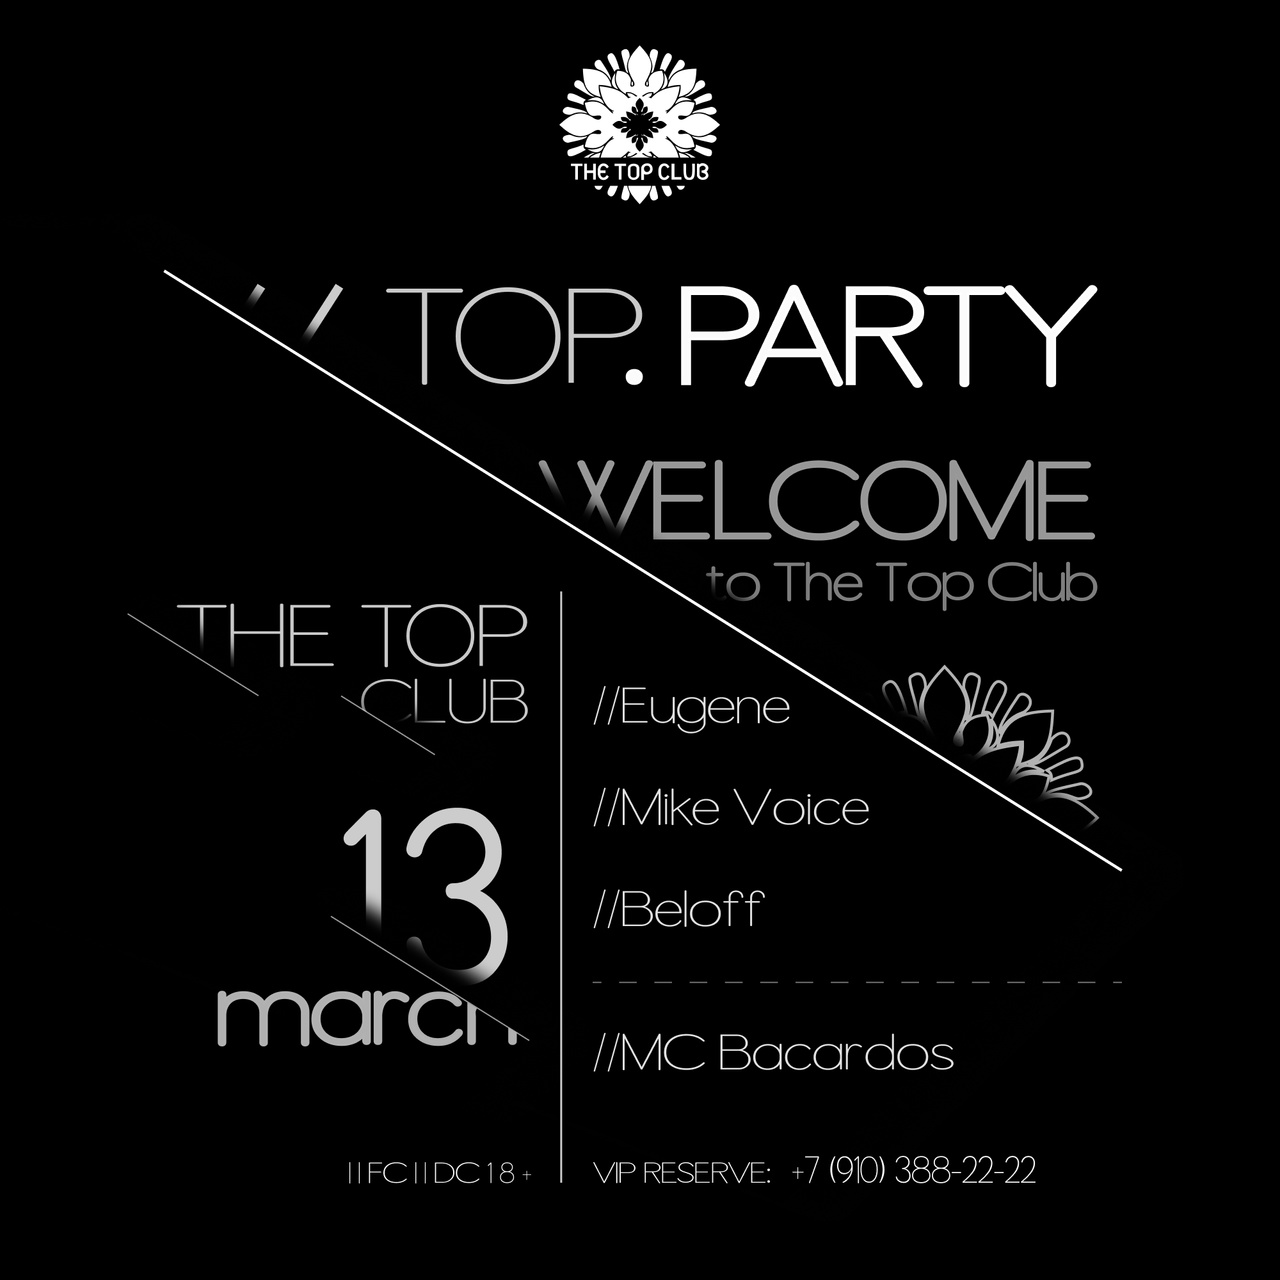 TOP. PARTY